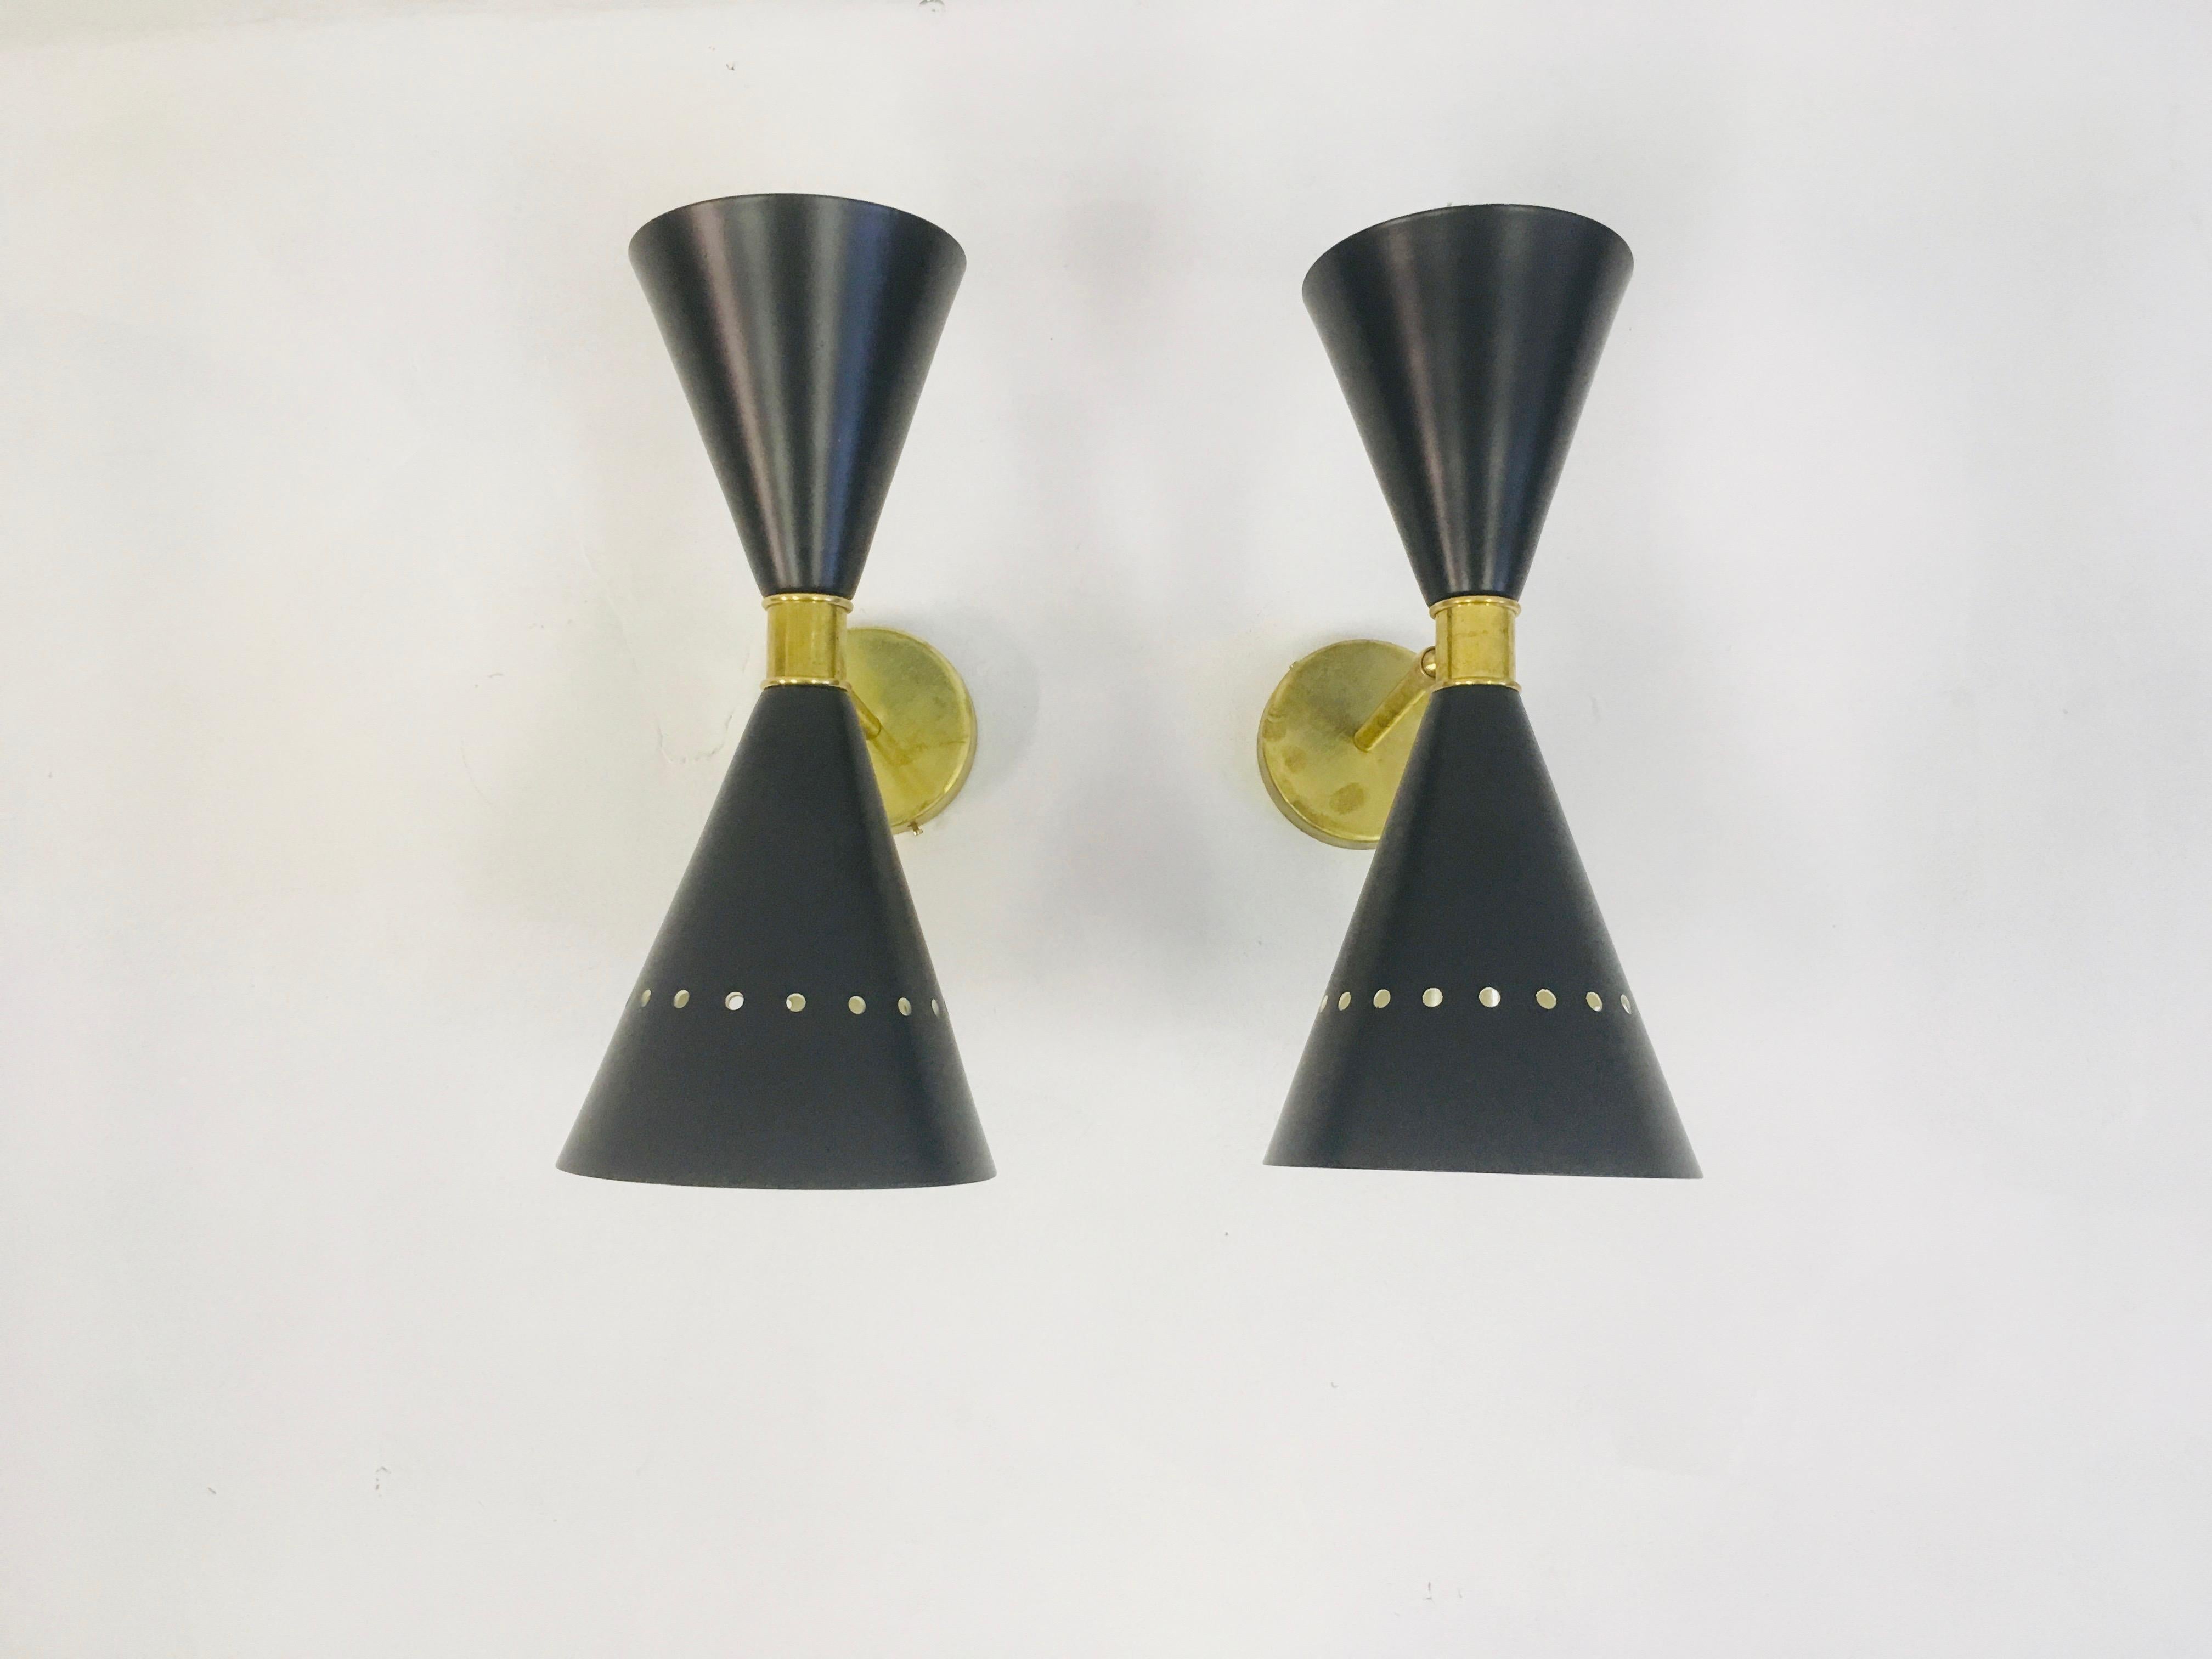 A pair of wall lights
Black lacquered metal
Brass band and fittings
Adjustable
1950s style
Made in Italy
Price is for a pair
Larger quantity can be ordered.